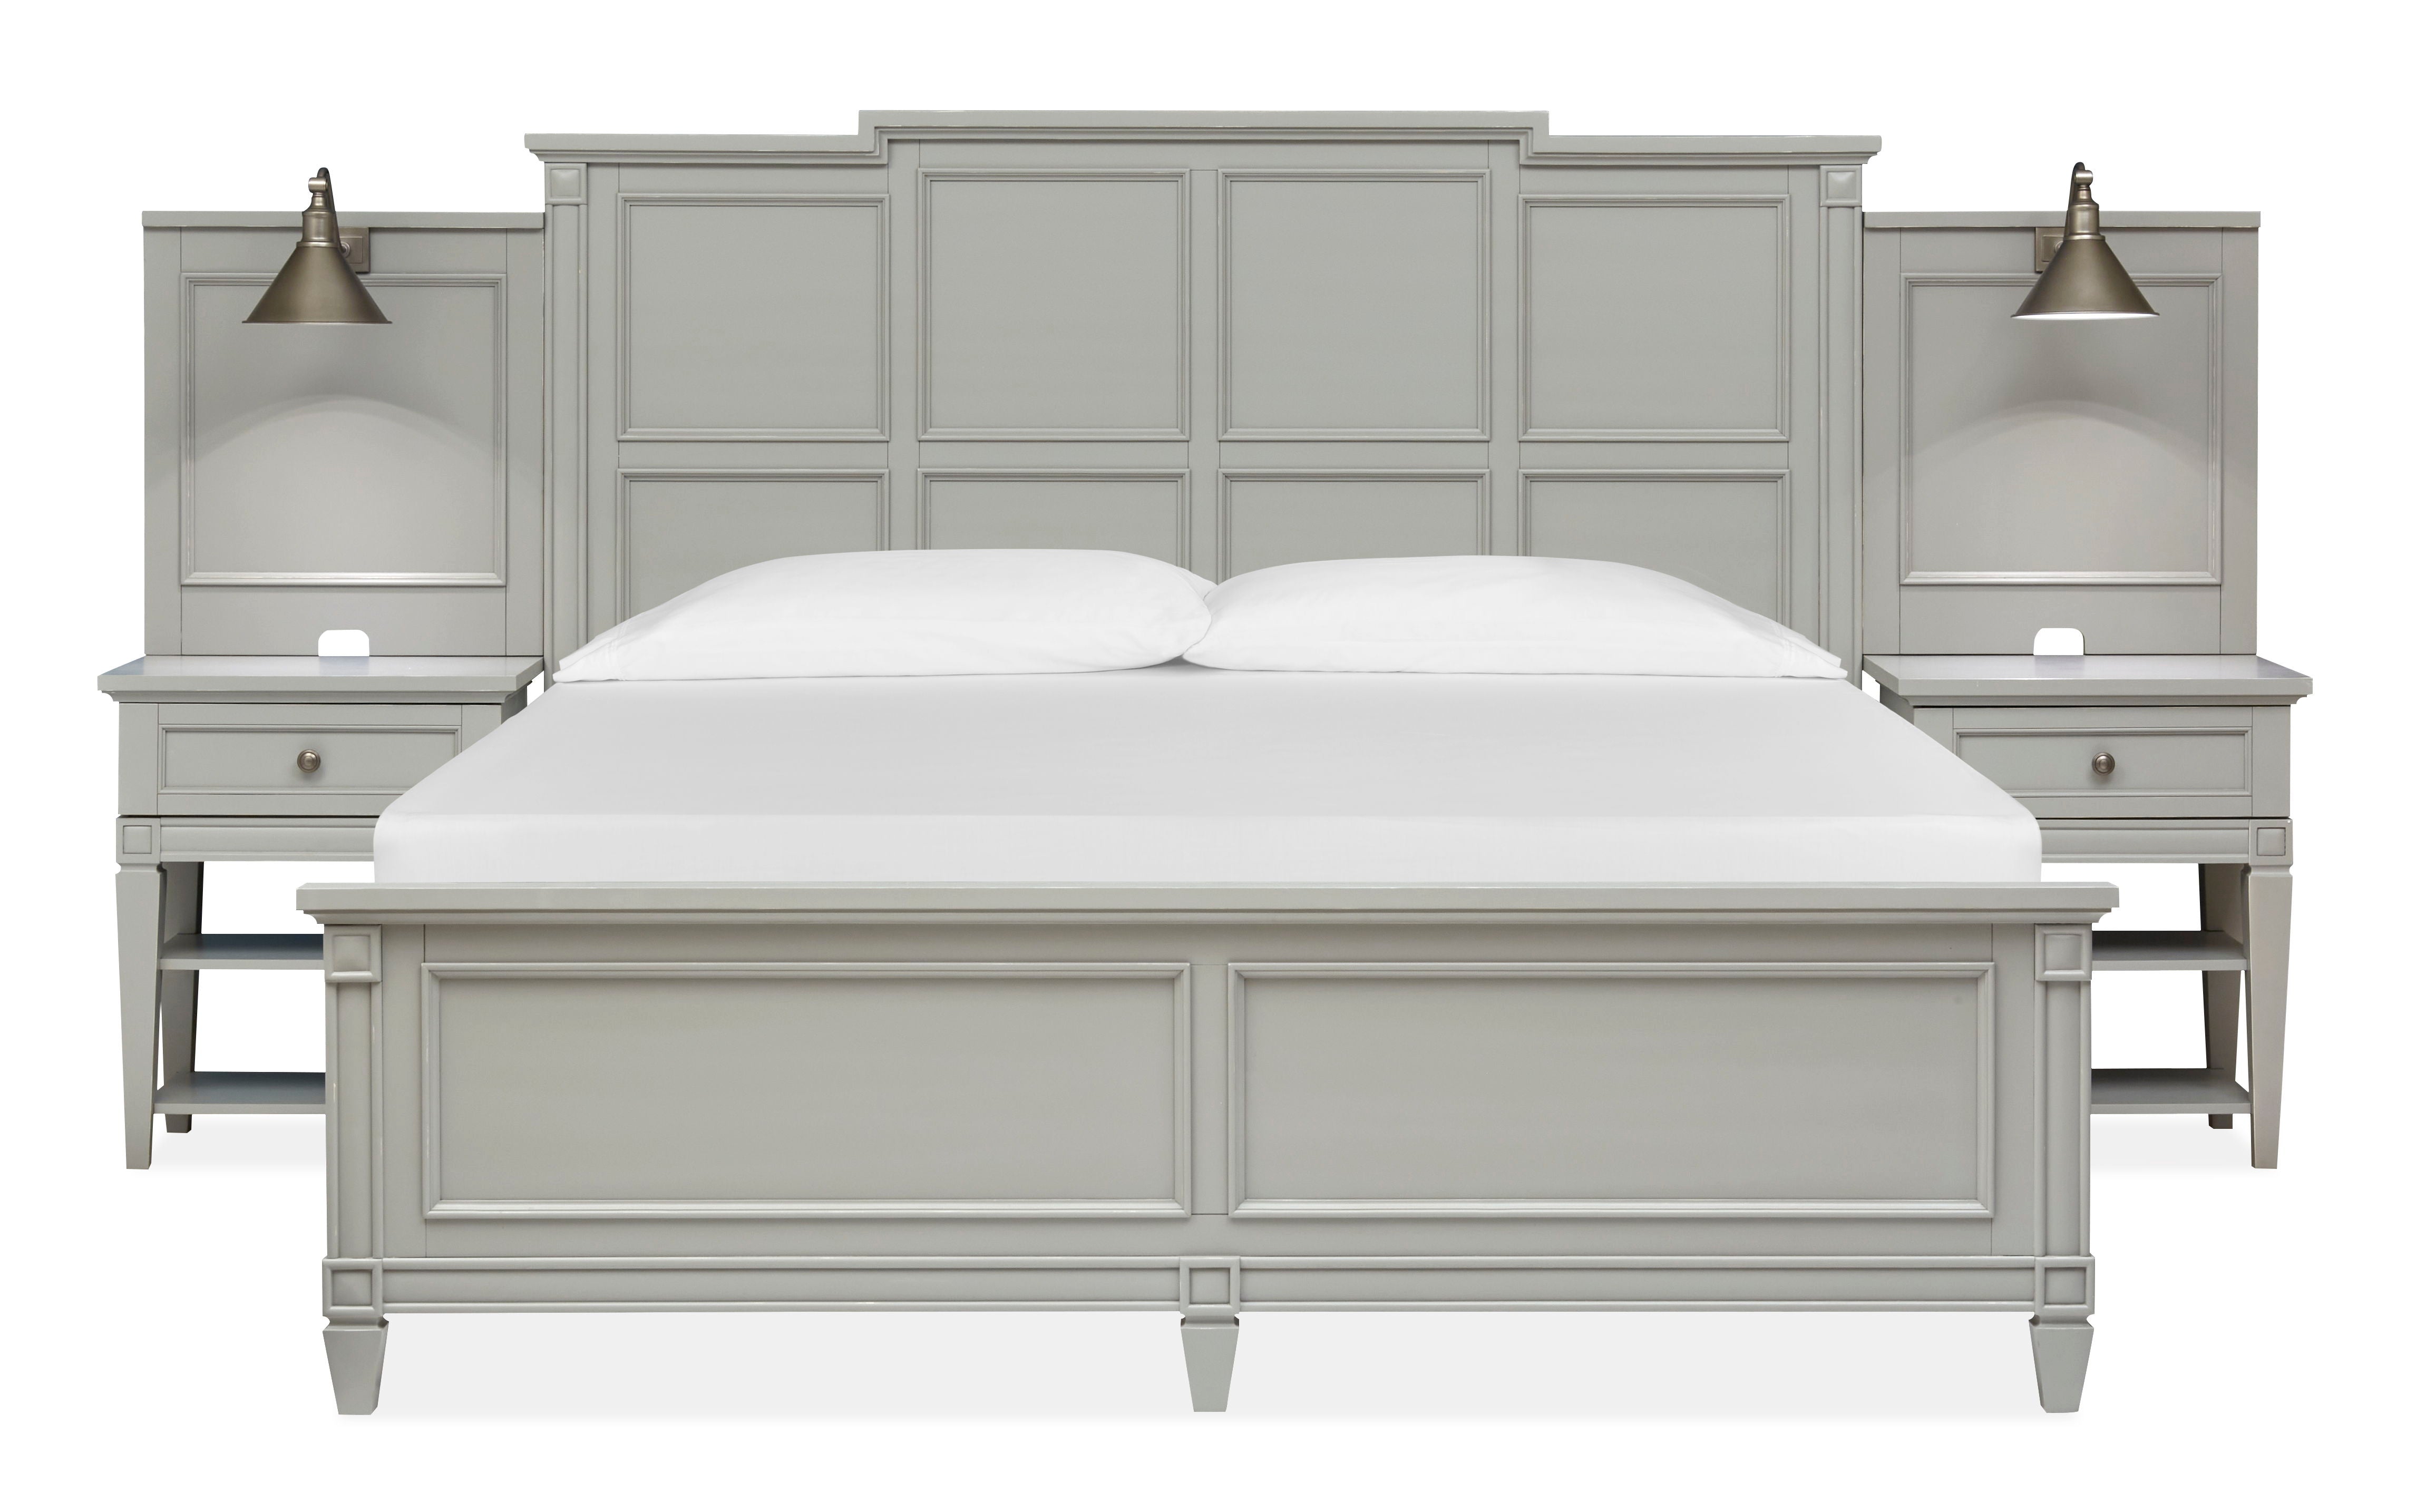 Glenbrook - Complete Wall Bed